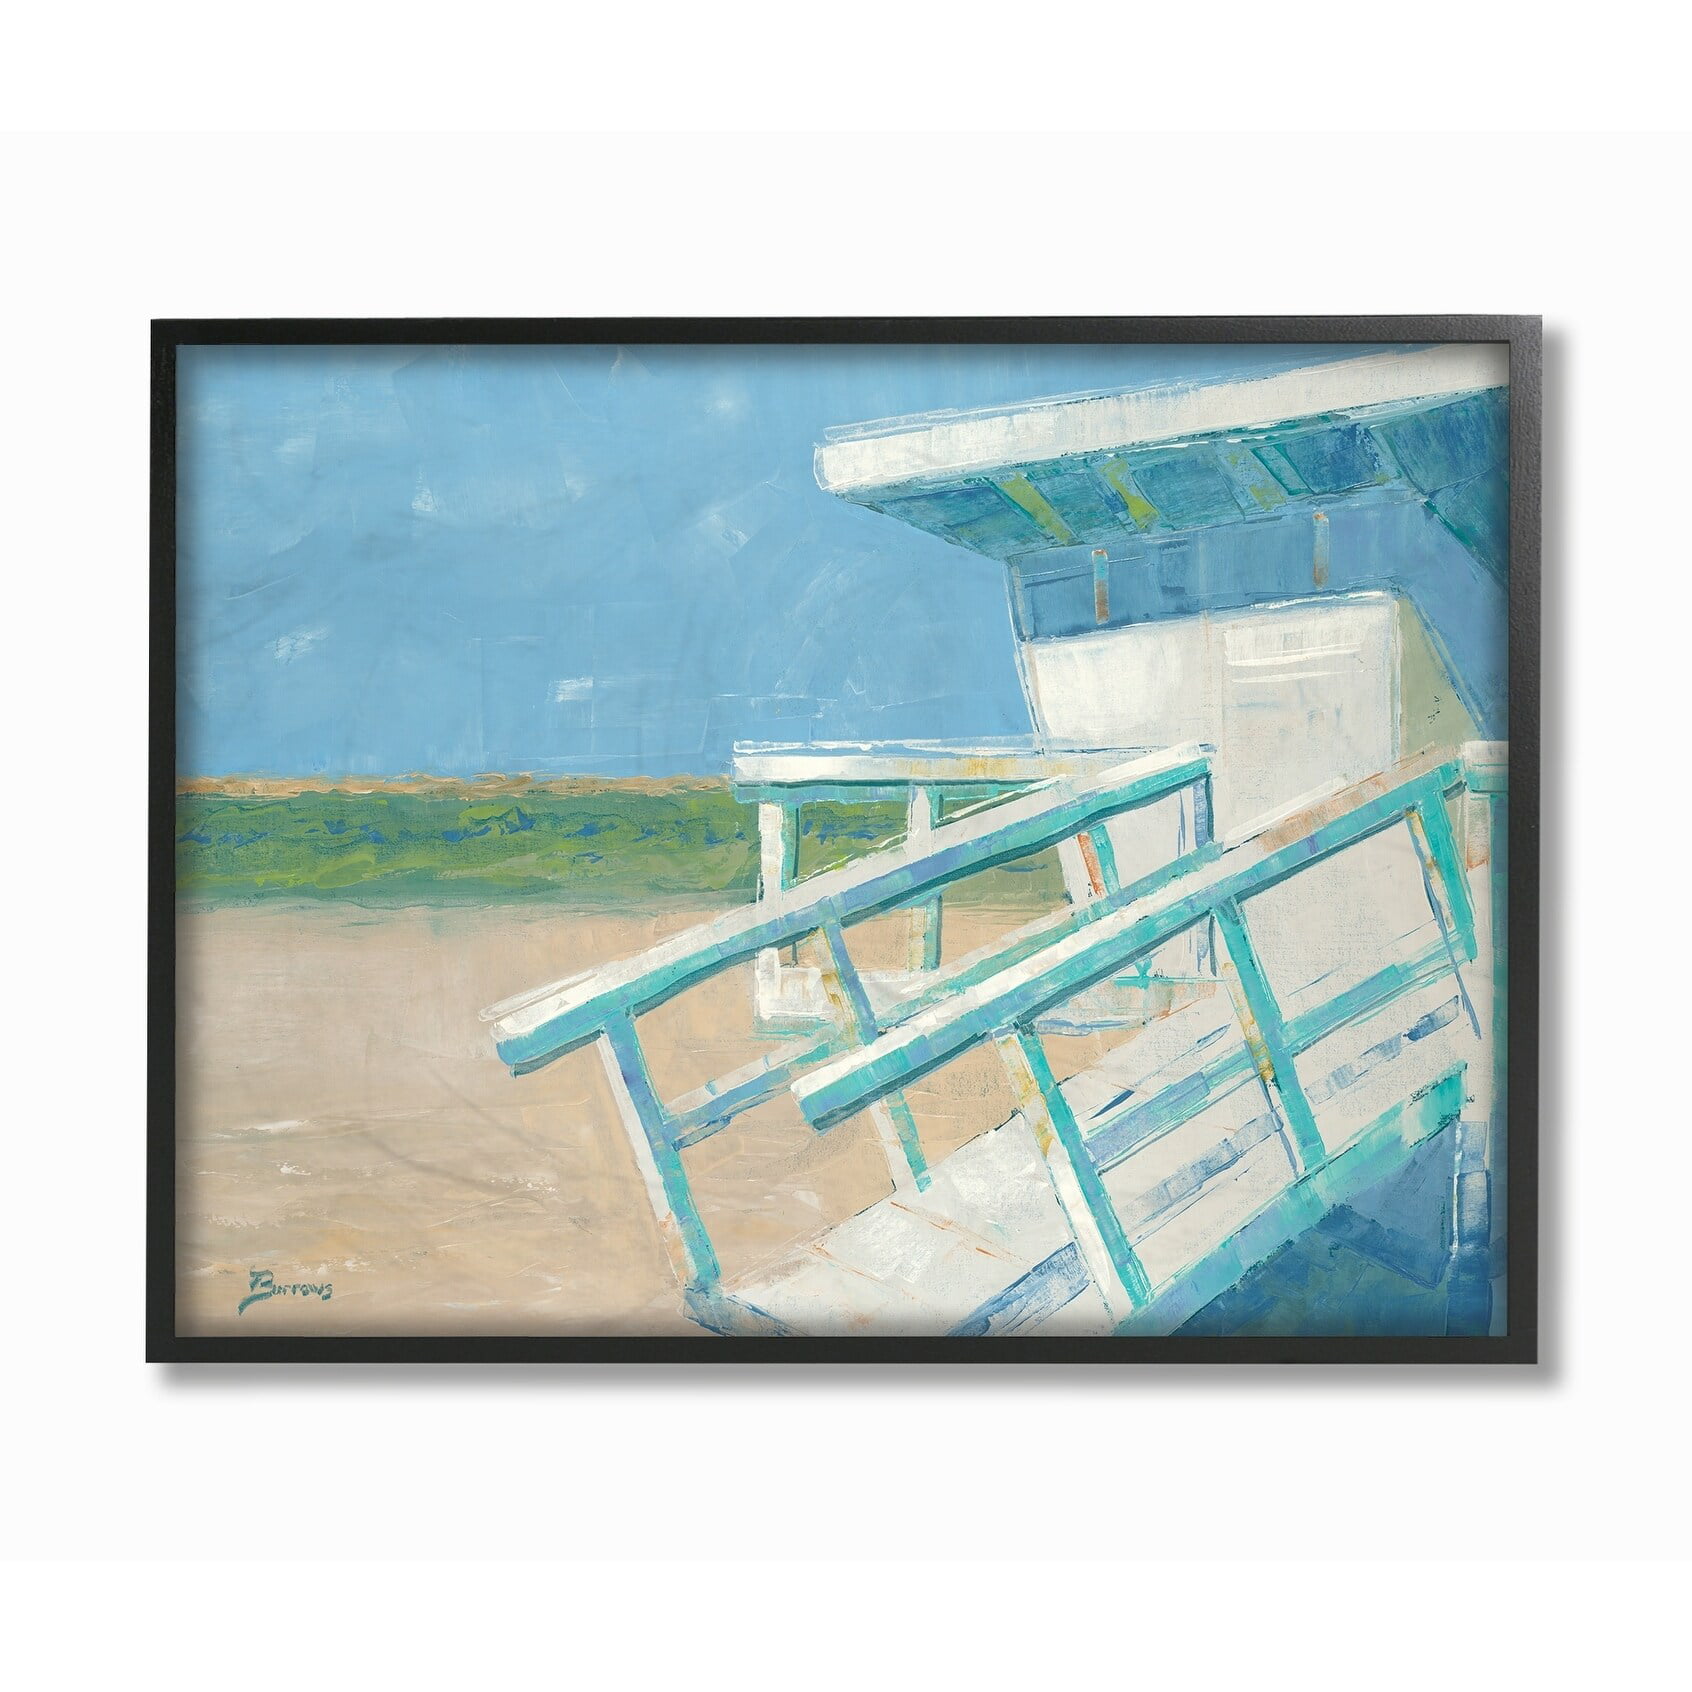 Multi-Color 24 x 30 The Stupell Home Decor Painterly Blue and Green Lifeguard House on The Beach Framed Giclee Texturized Art